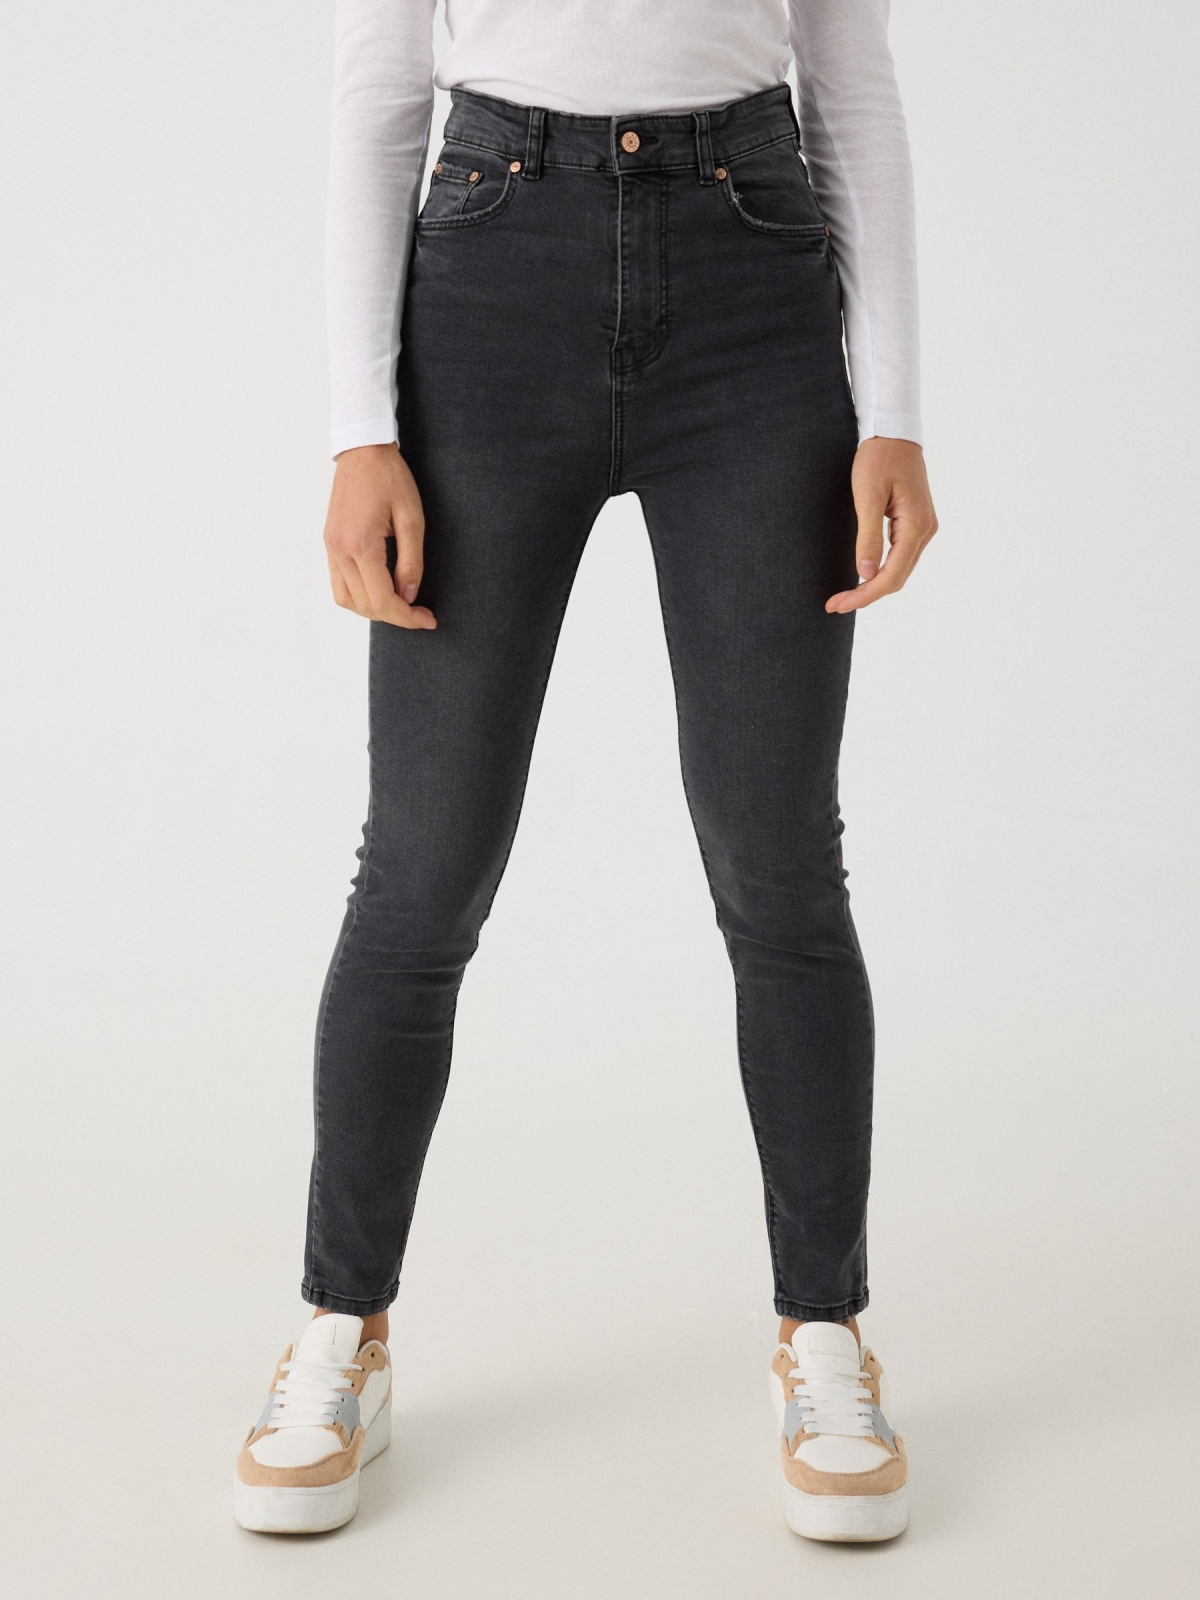 High waist skinny jeans black washed effect black middle front view